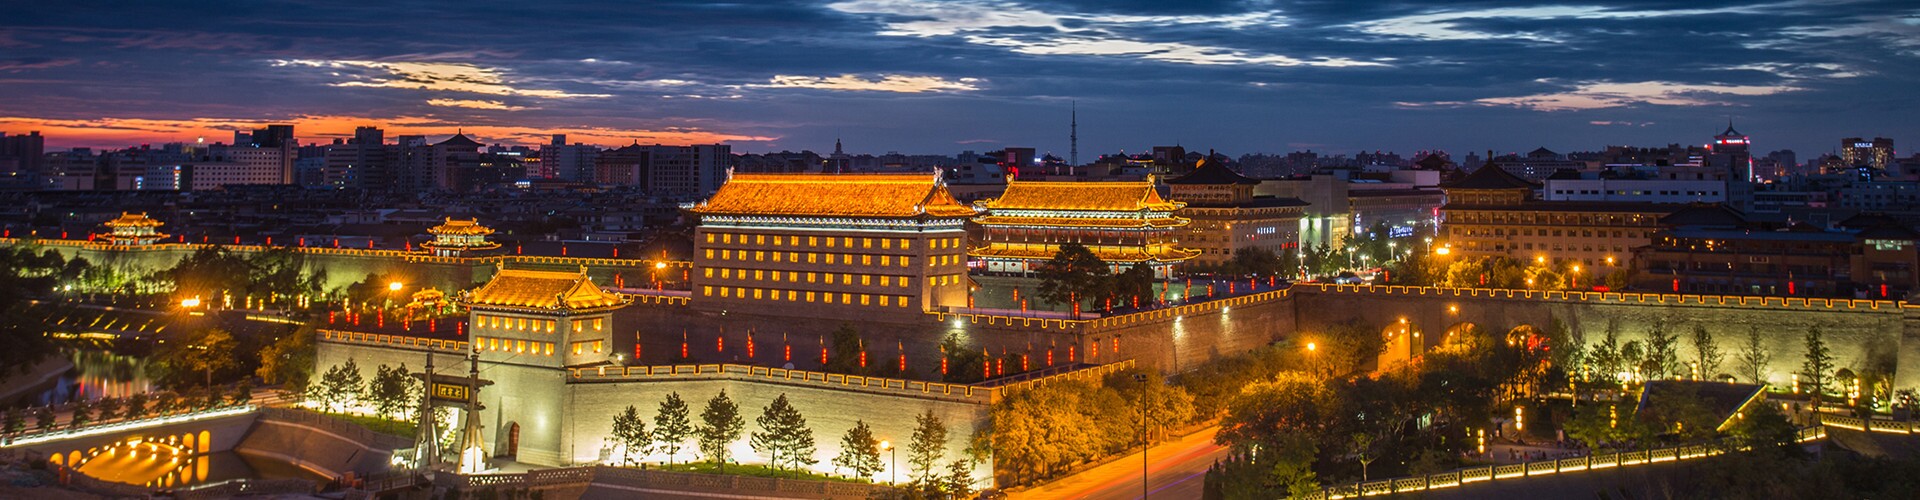 Top 10 Things to Do in Xi'an